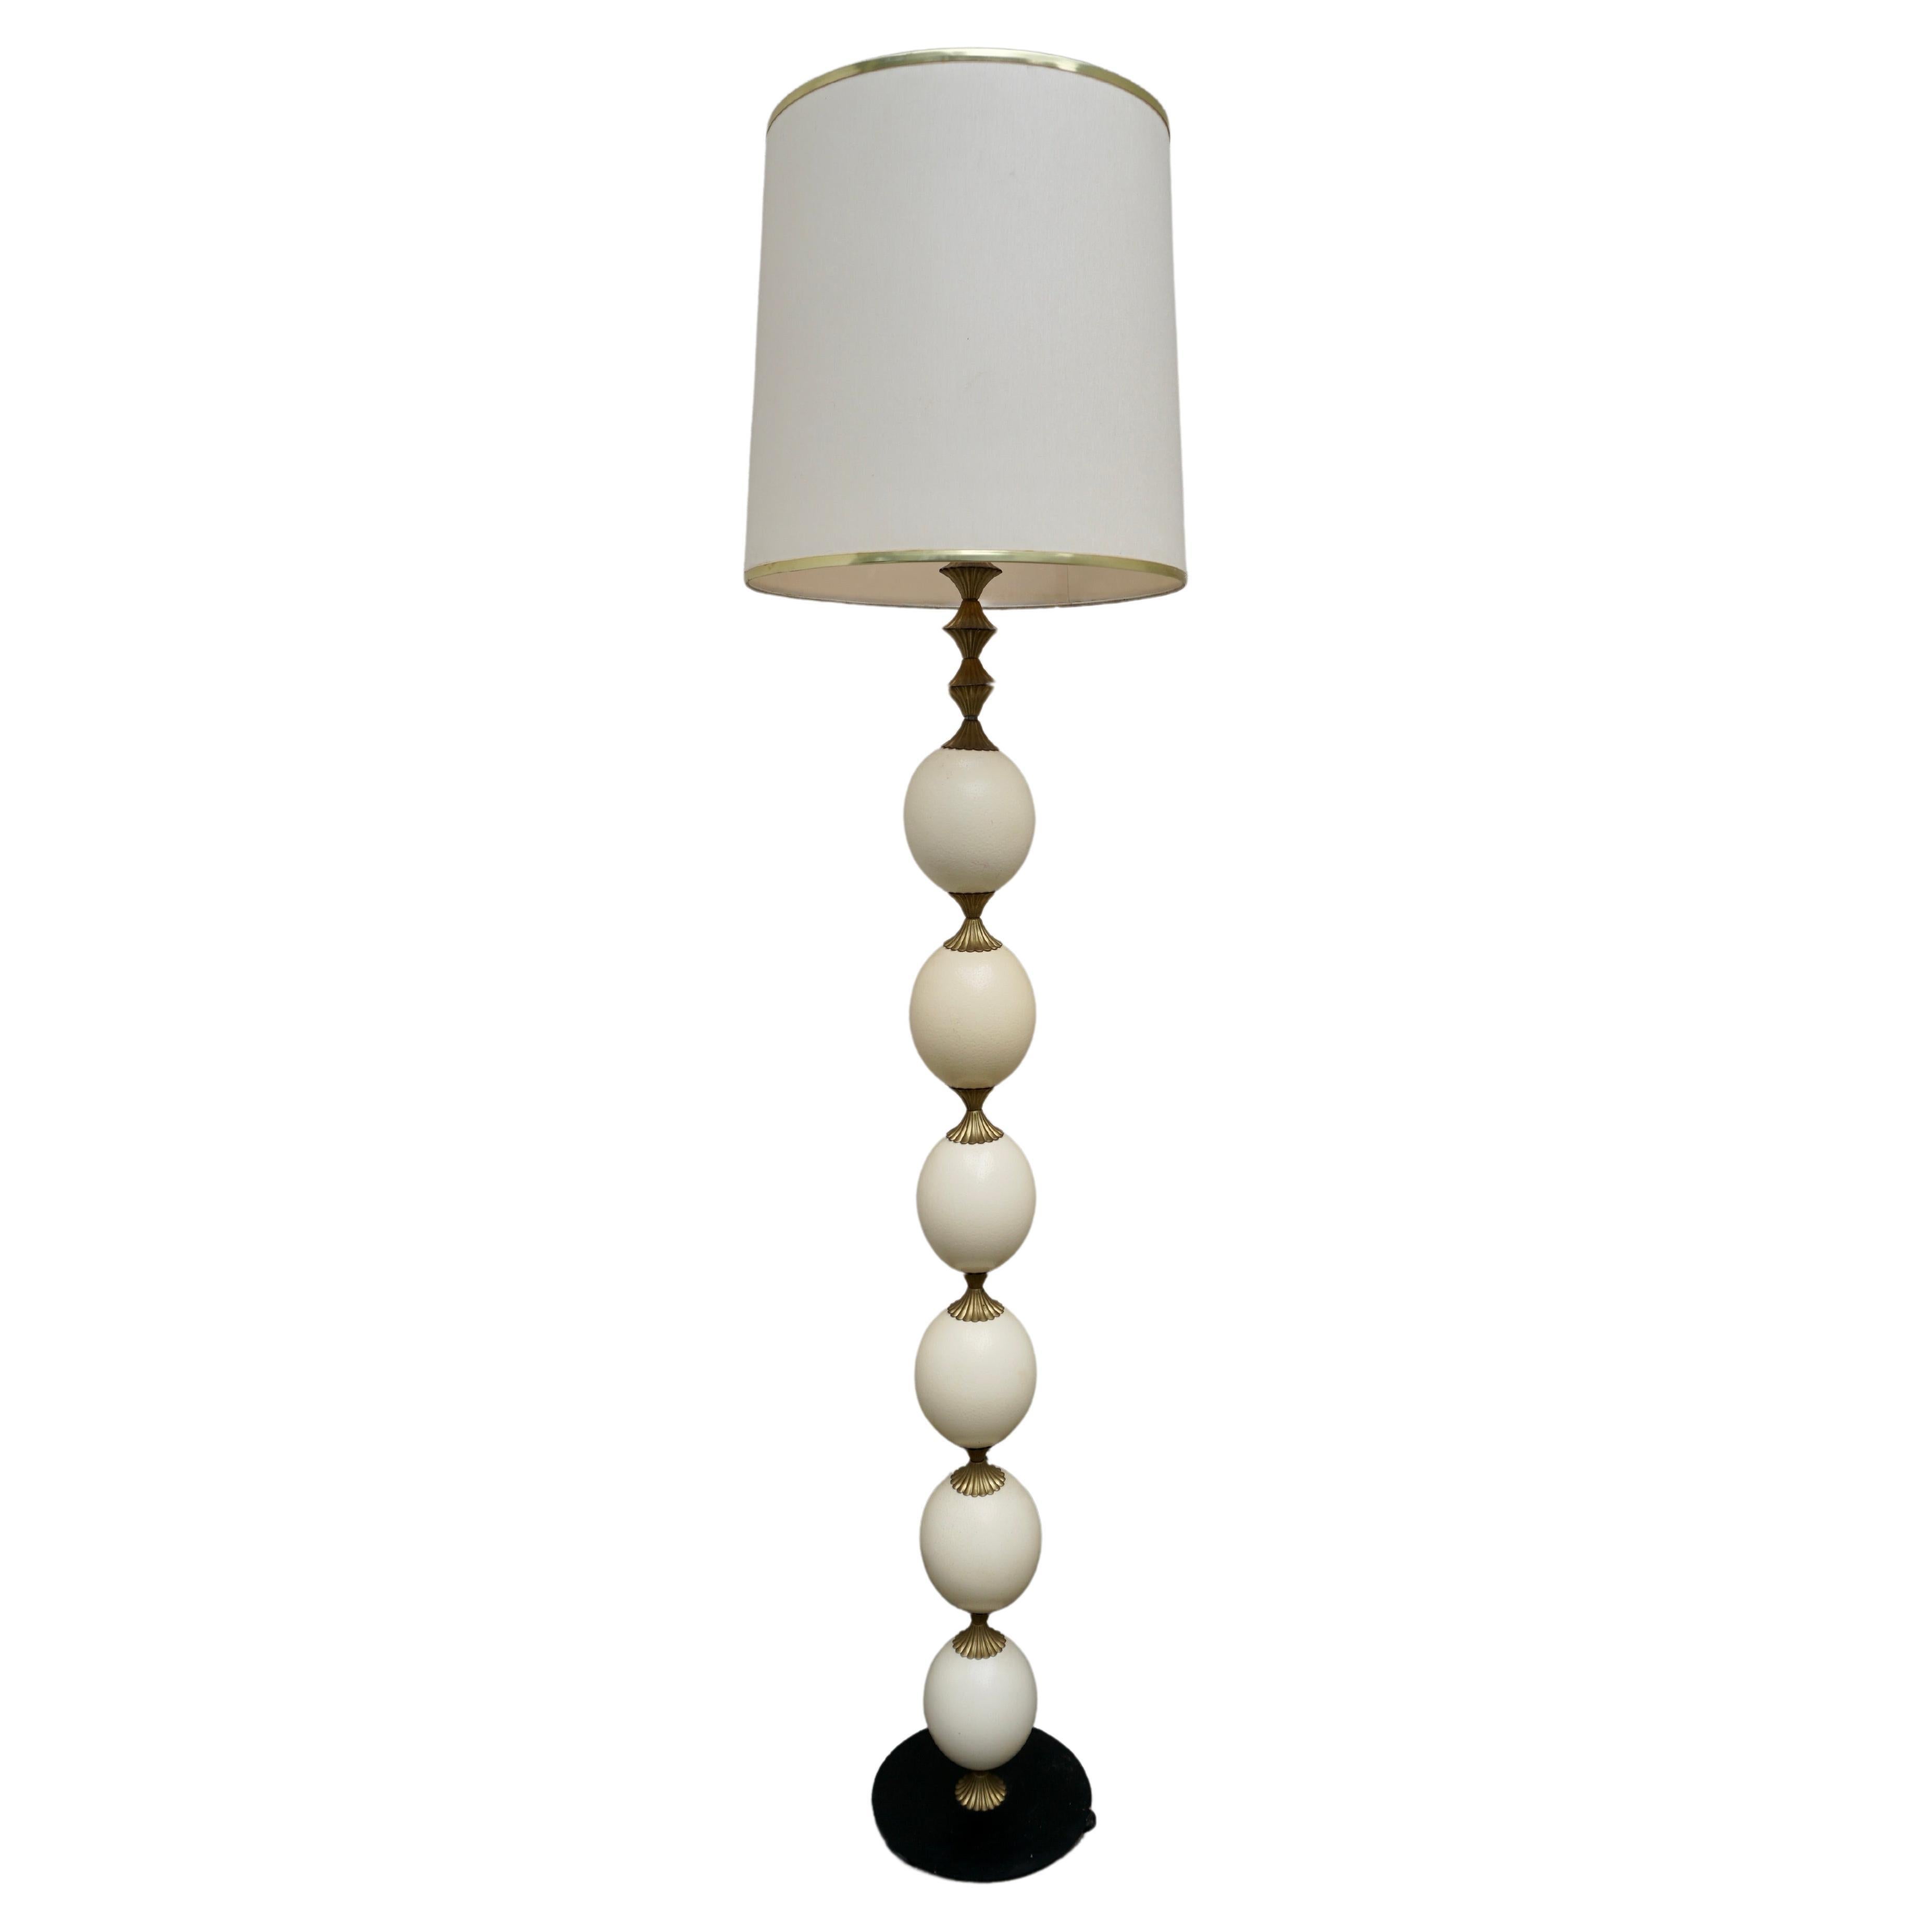 A stunning Hollywood Regency style lamp in brass, quite substantial and will surely be a conversation piece in any home.

Note: Lamp height without shade to top of socket is 55.1 inches tall. 

Diameter shade 15.7